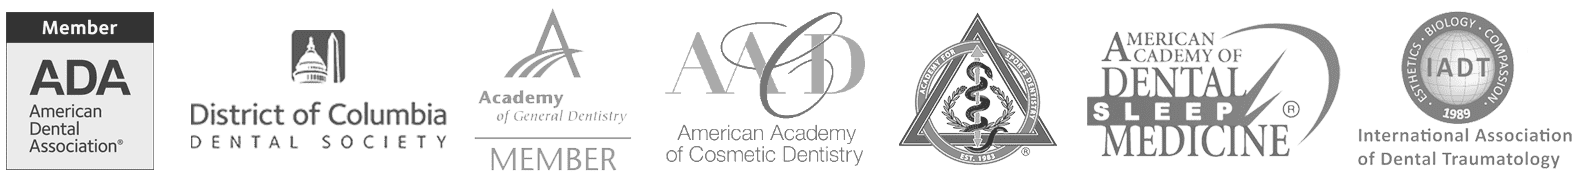 American Dental Association - District of Columbia Dental Society - Academy of General Dentistry - Academy of Cosmetic Dentistry